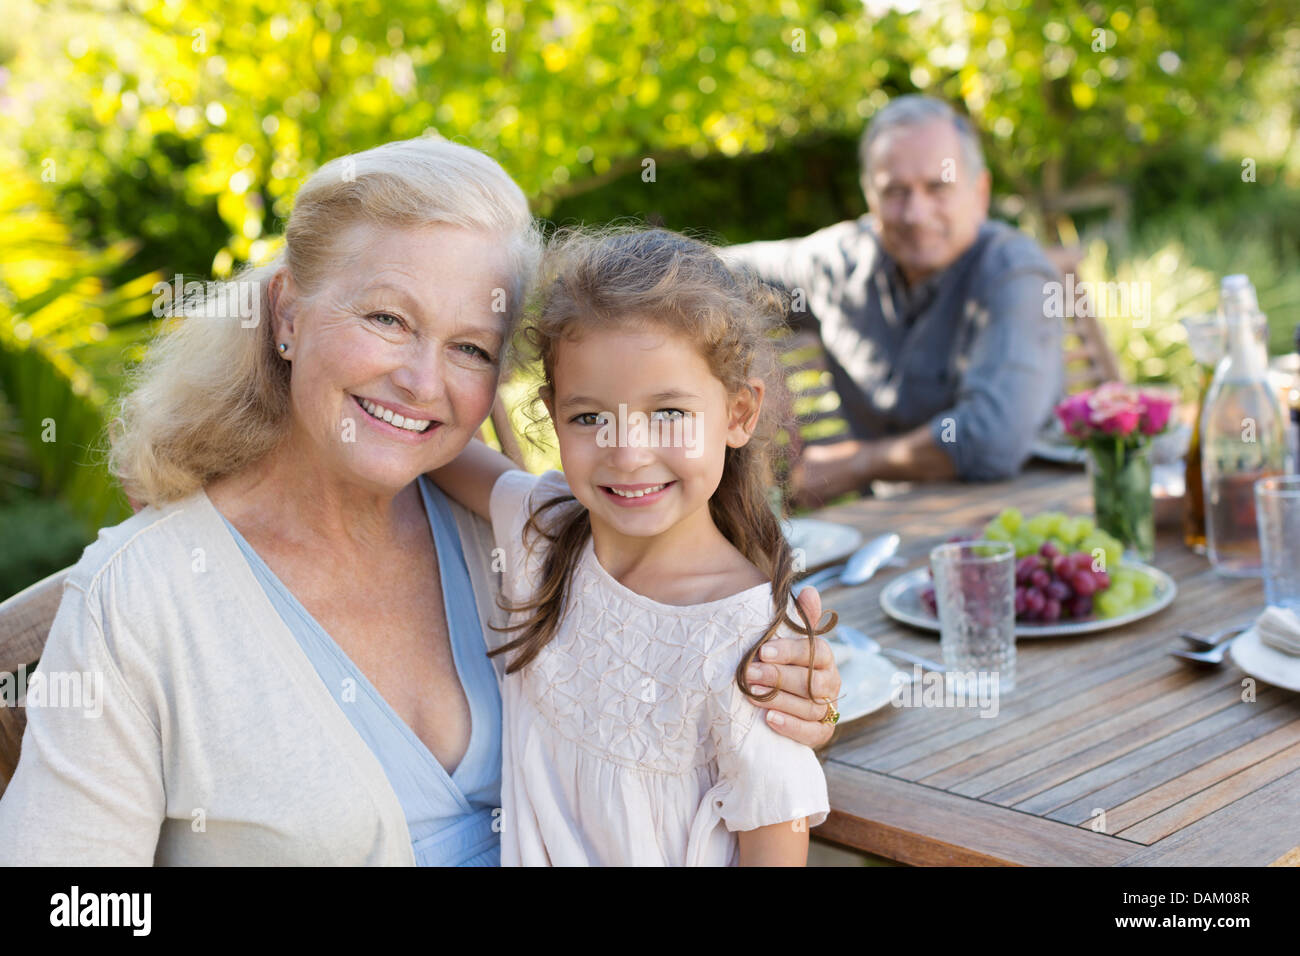 Older woman and granddaughter smiling outdoors Stock Photo